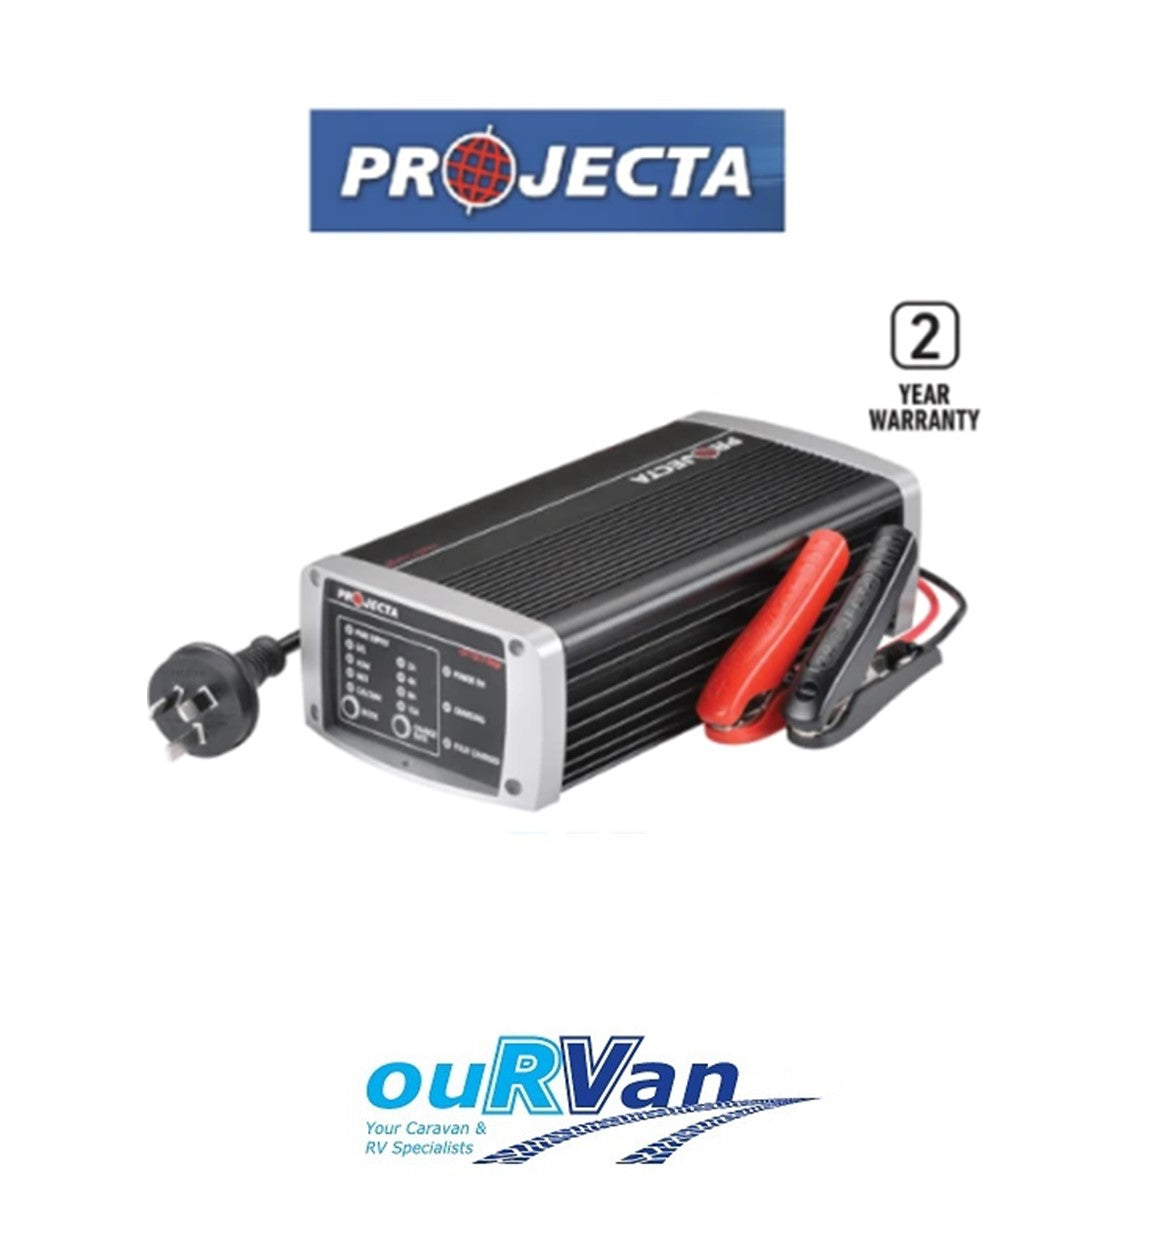 PROJECTA 12V BATTERY CHARGER POWER SUPPLY 15AMP 7 STAGE MULTI CHEMISTRY